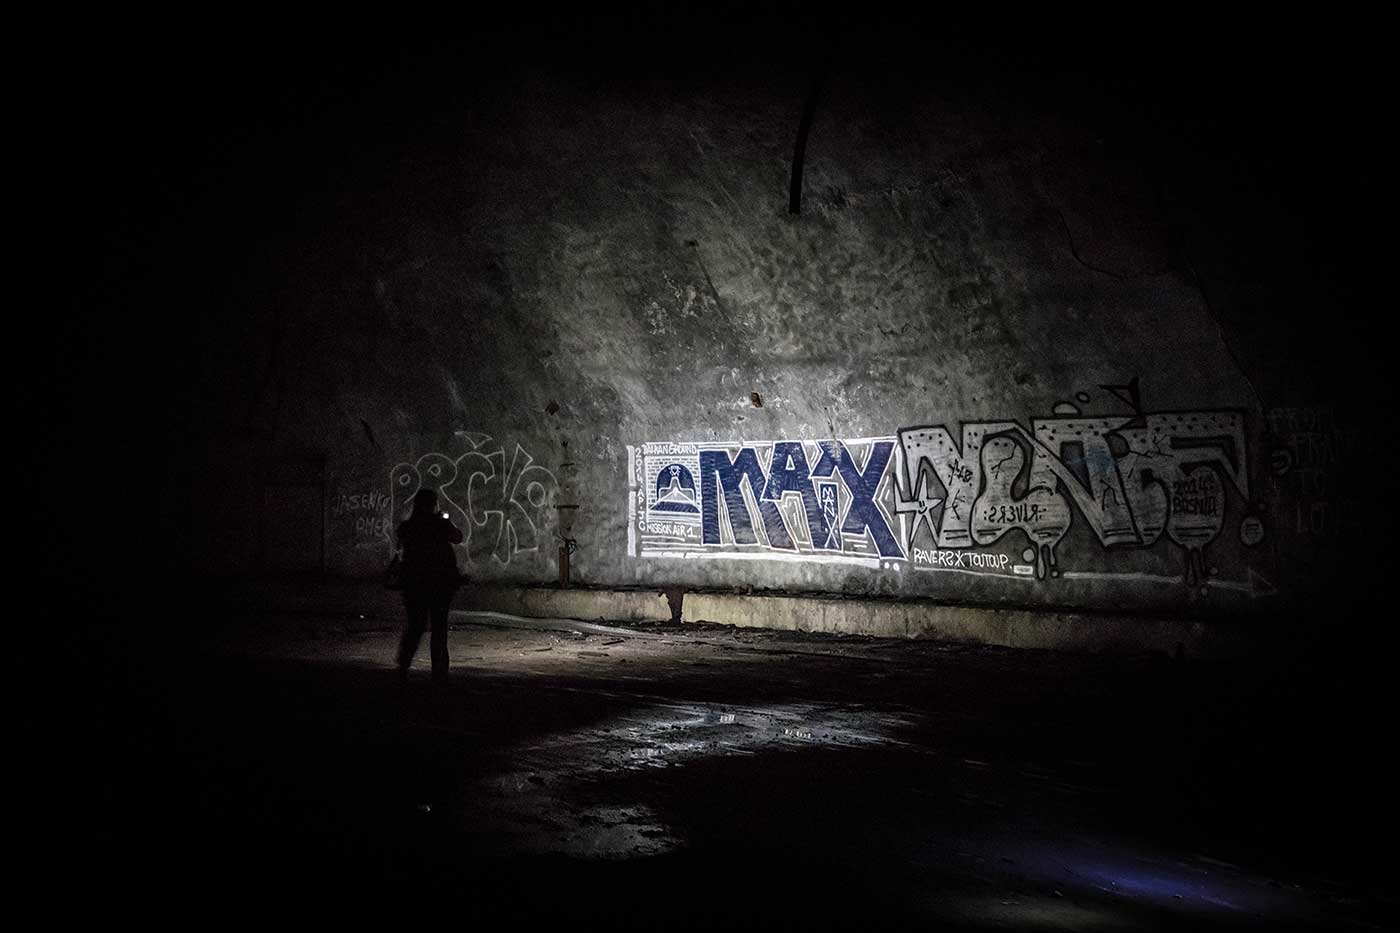 Graffiti inside the Željava complex. The deeper into the mountain you go, the less graffiti you find.